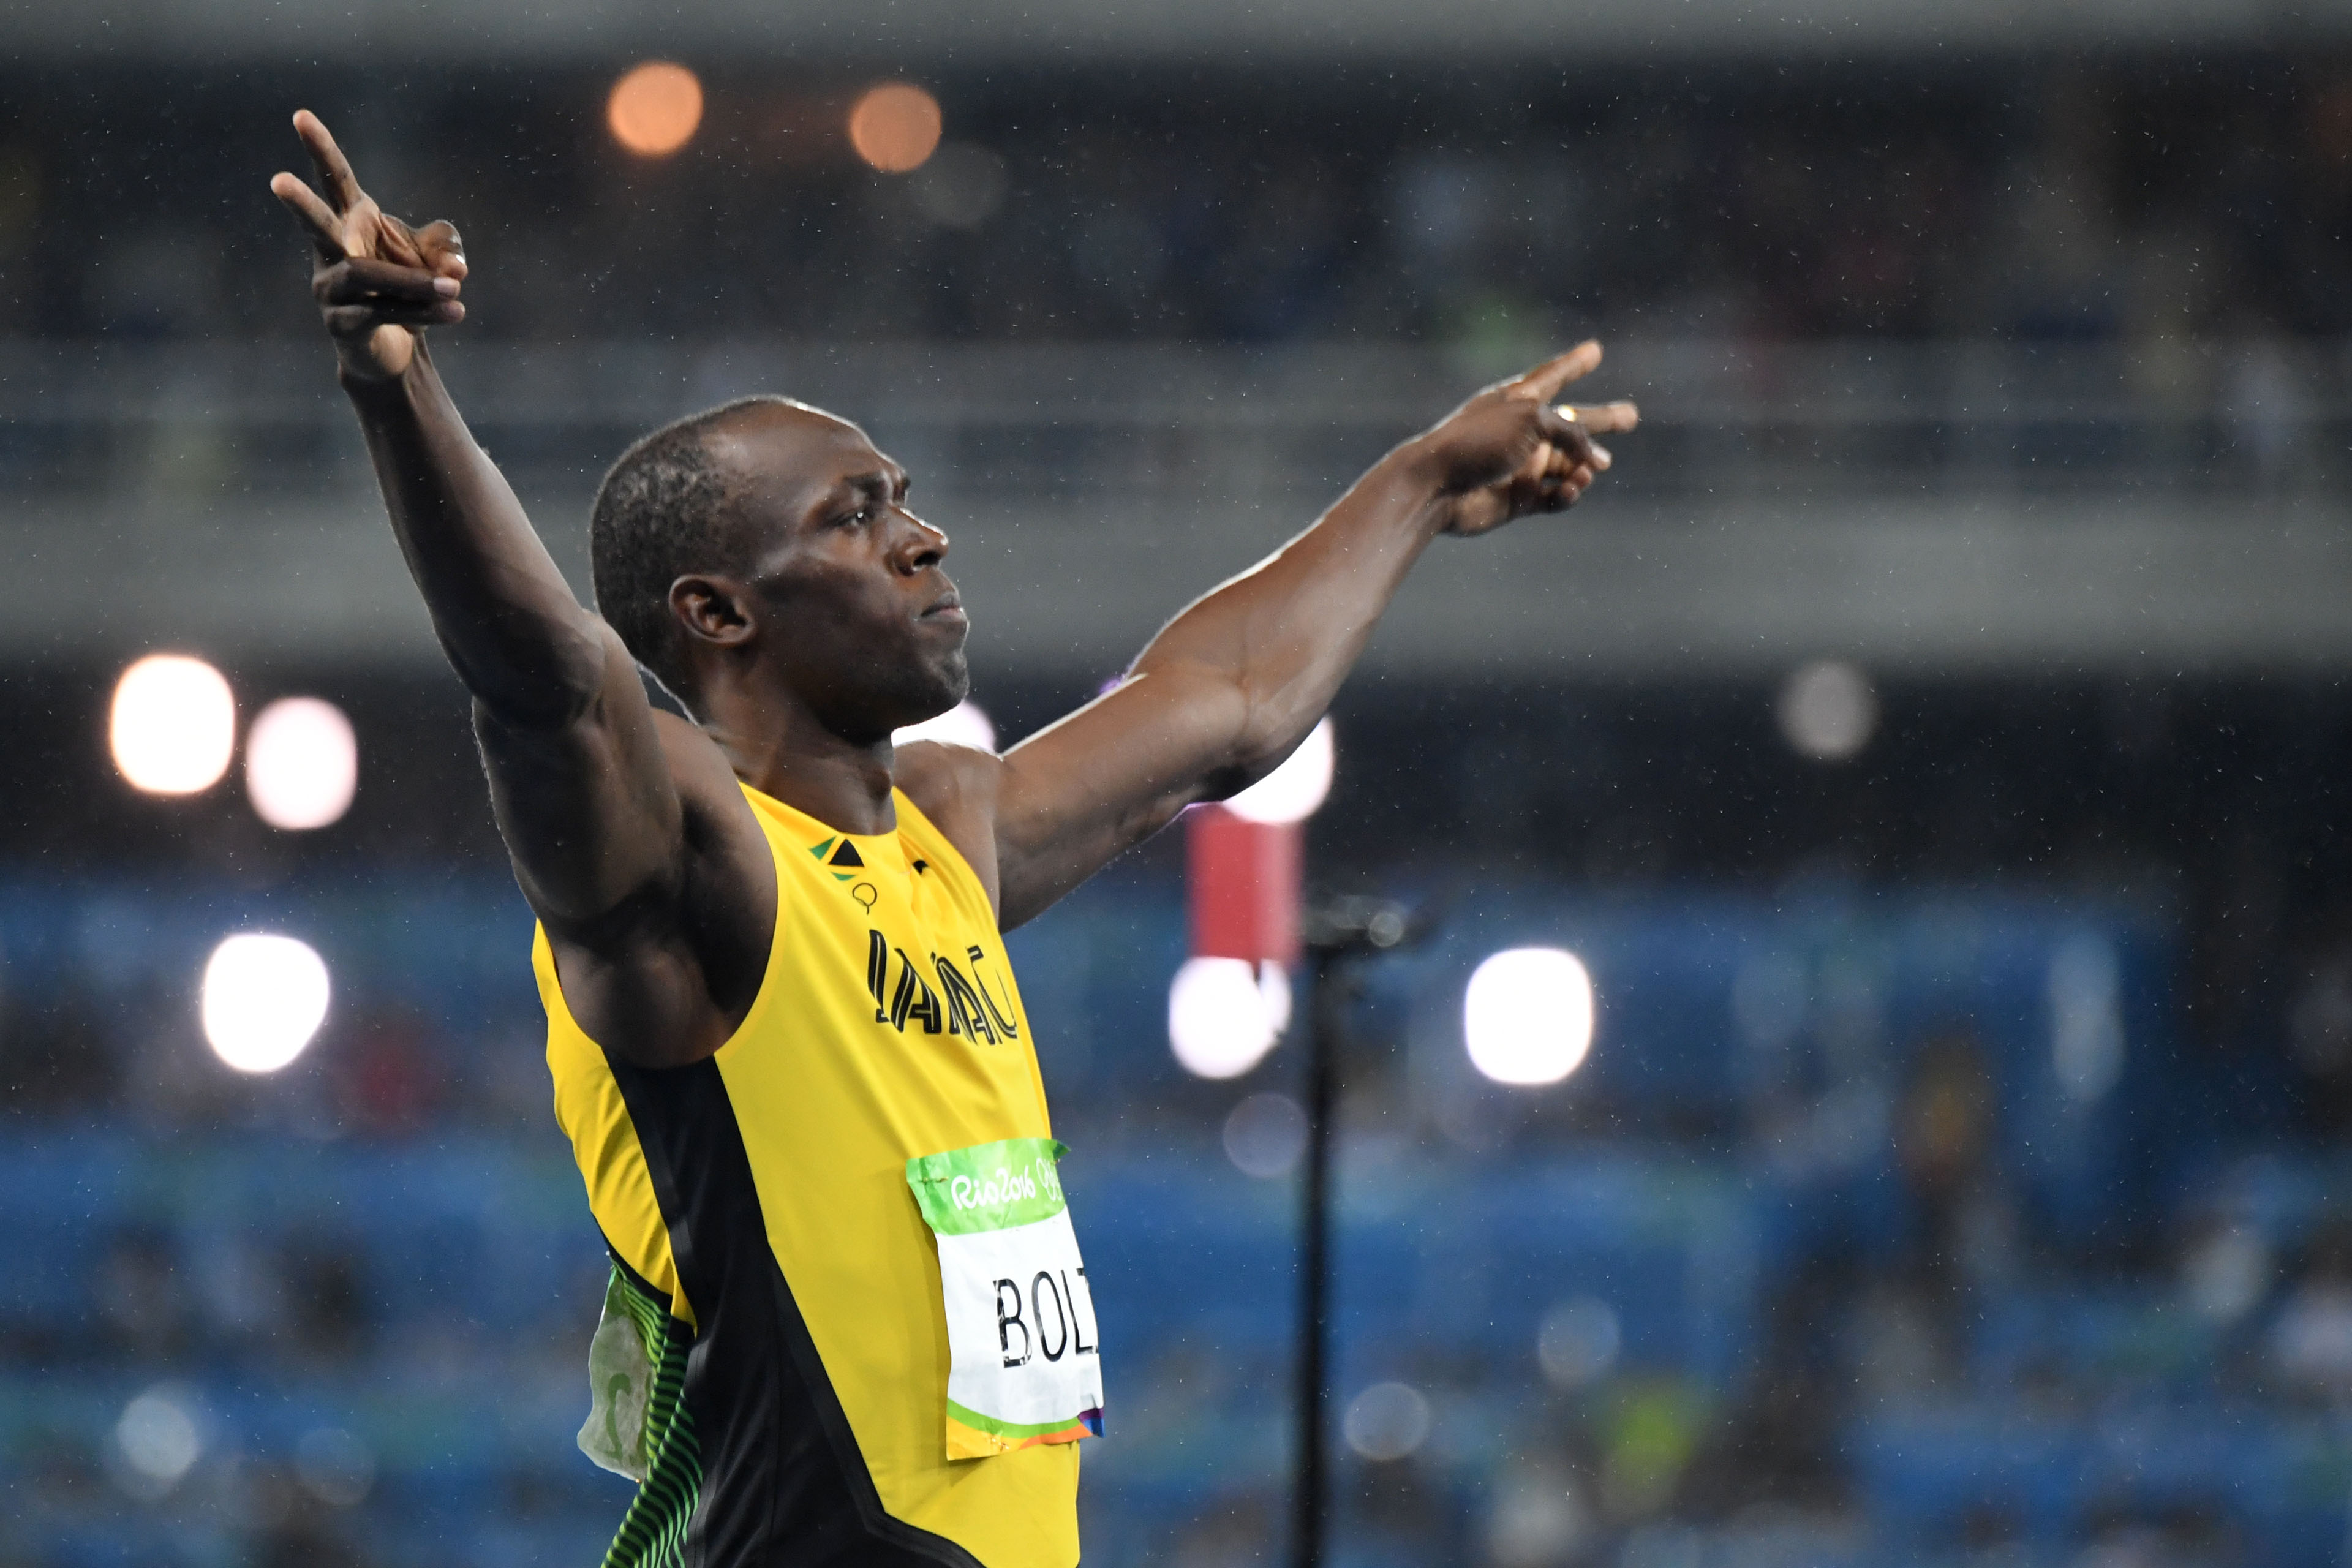 Jamaica's Usain Bolt celebrates after he won the Men's 200m Final during the athletics event at the Rio 2016 Olympic Games at the Olympic Stadium in Rio de Janeiro on Aug. 18, 2016. (Martin Bernetti—AFP/Getty Images)